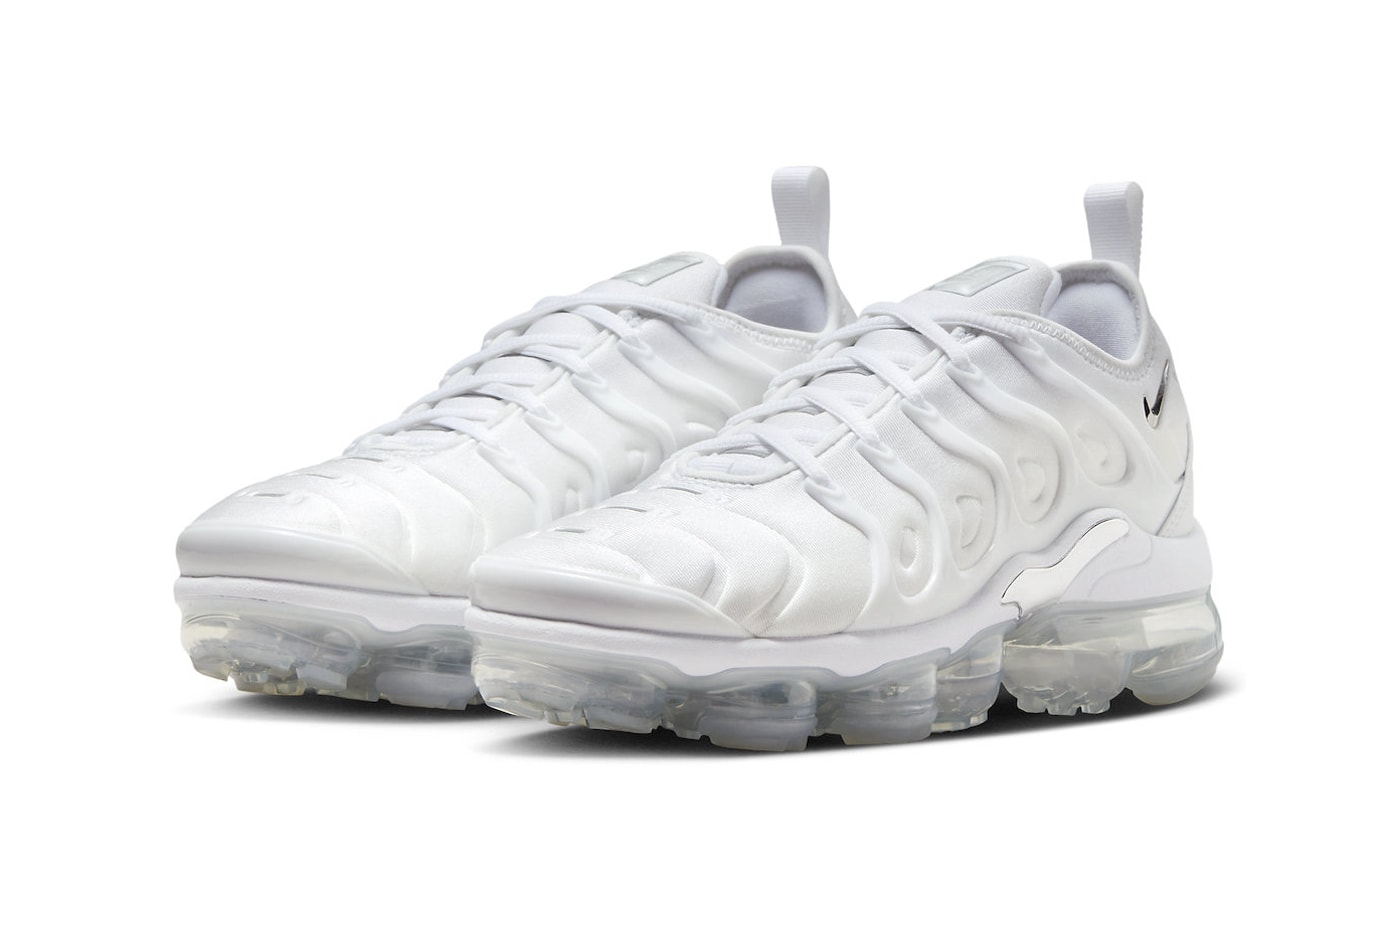 Official Look at the Nike Air VaporMax Plus "White Chrome" FQ8895-100 winter holiday 2023 air max triple white sole unit footwear sneaker